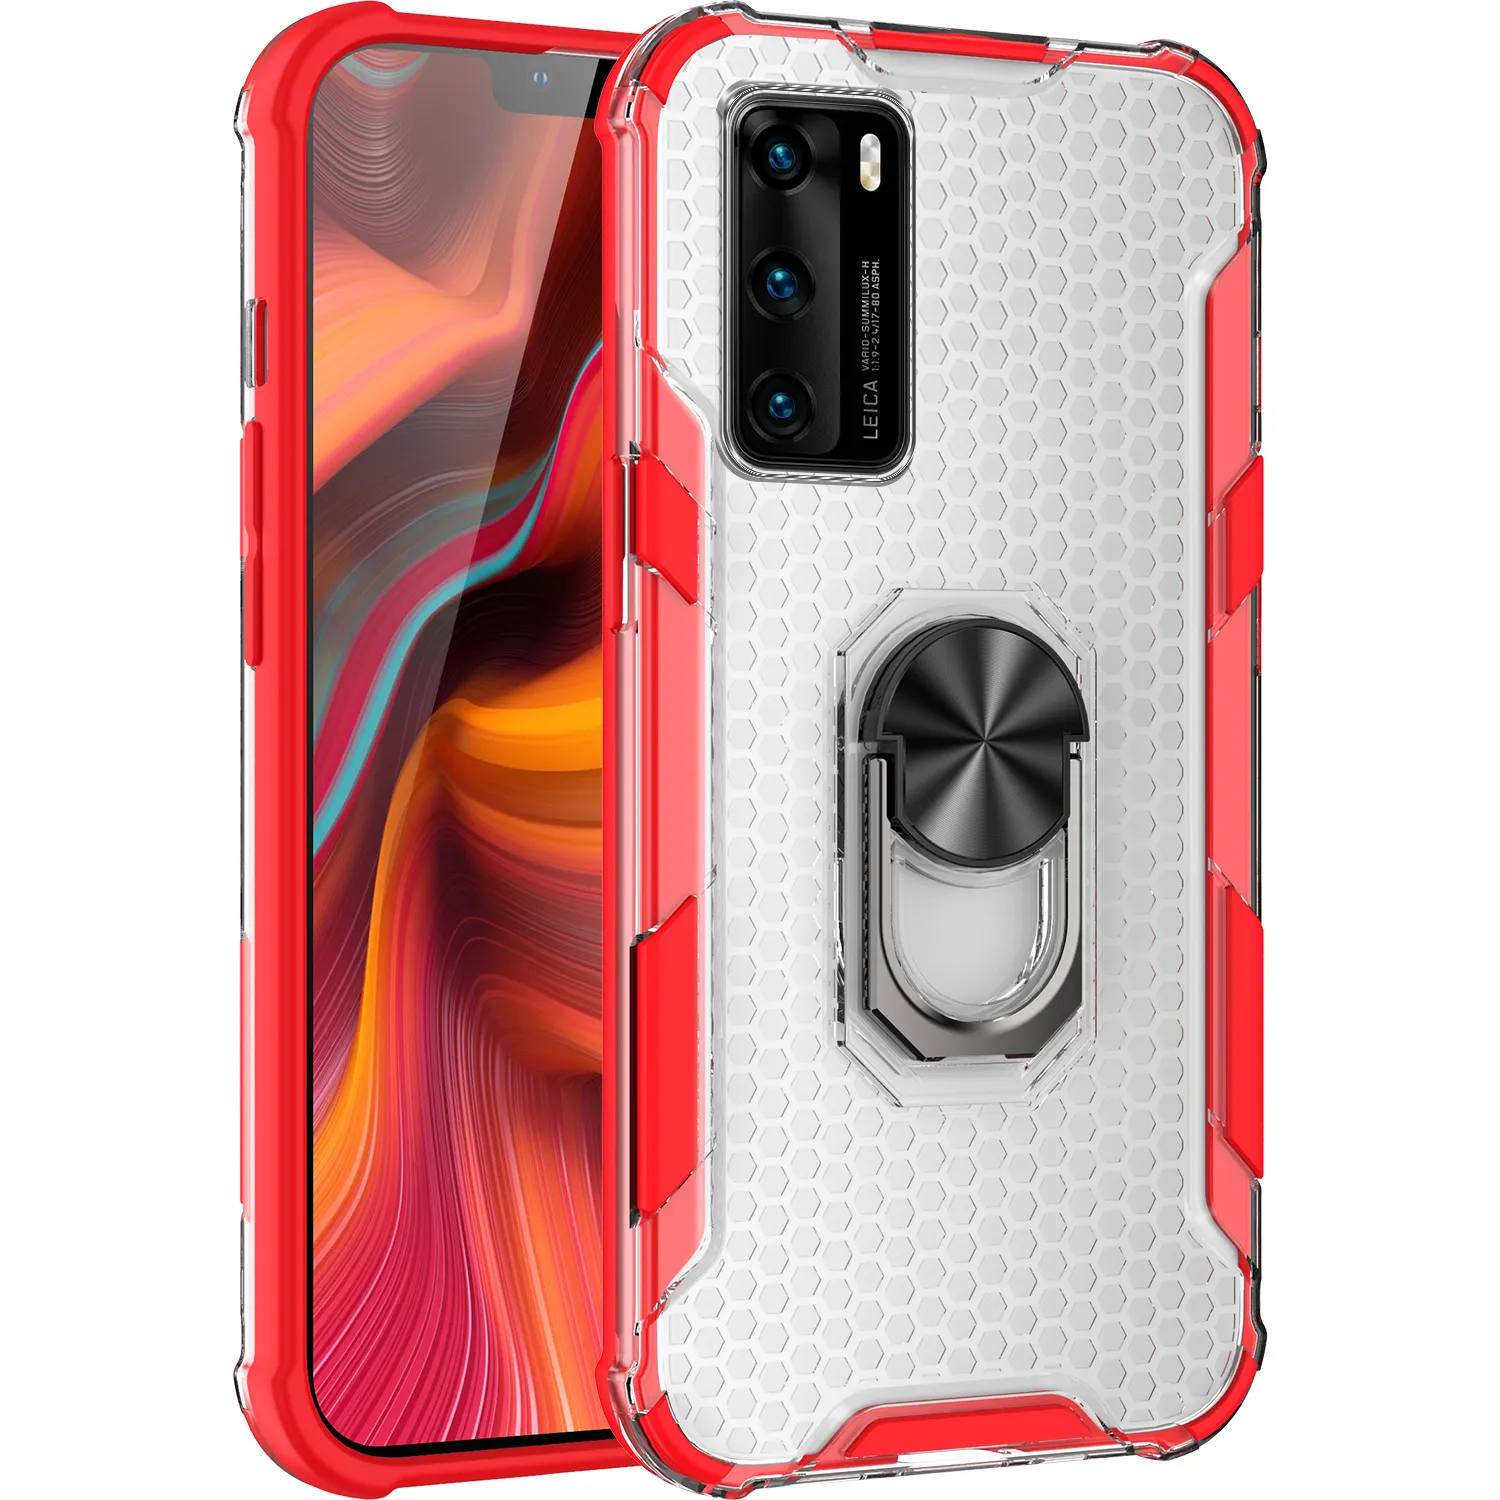 Magnetic Metal Ring Stand Honeycomb Shockproof Cases For Huawei P40 P30 Pro Nova 7i 7 6 SE P40 Lite 5G Clear Acrylic Back Cover